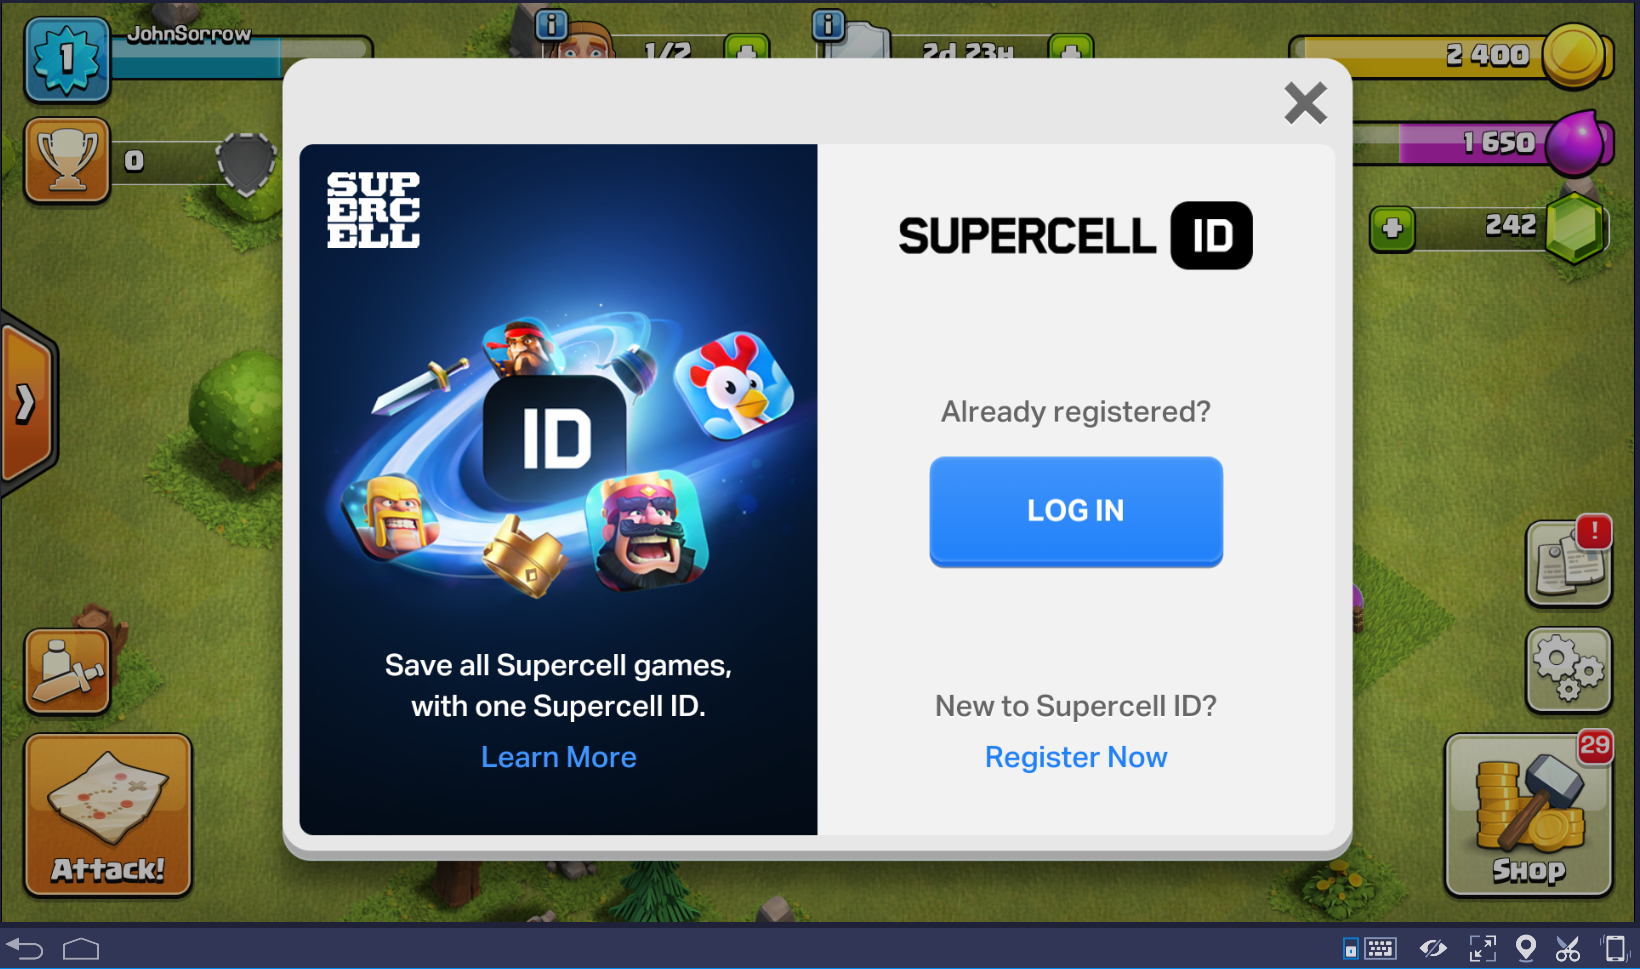 Supersell store. Суперселл аккаунты. Supercell код. Игры Supercell ID. Код от Supercell.